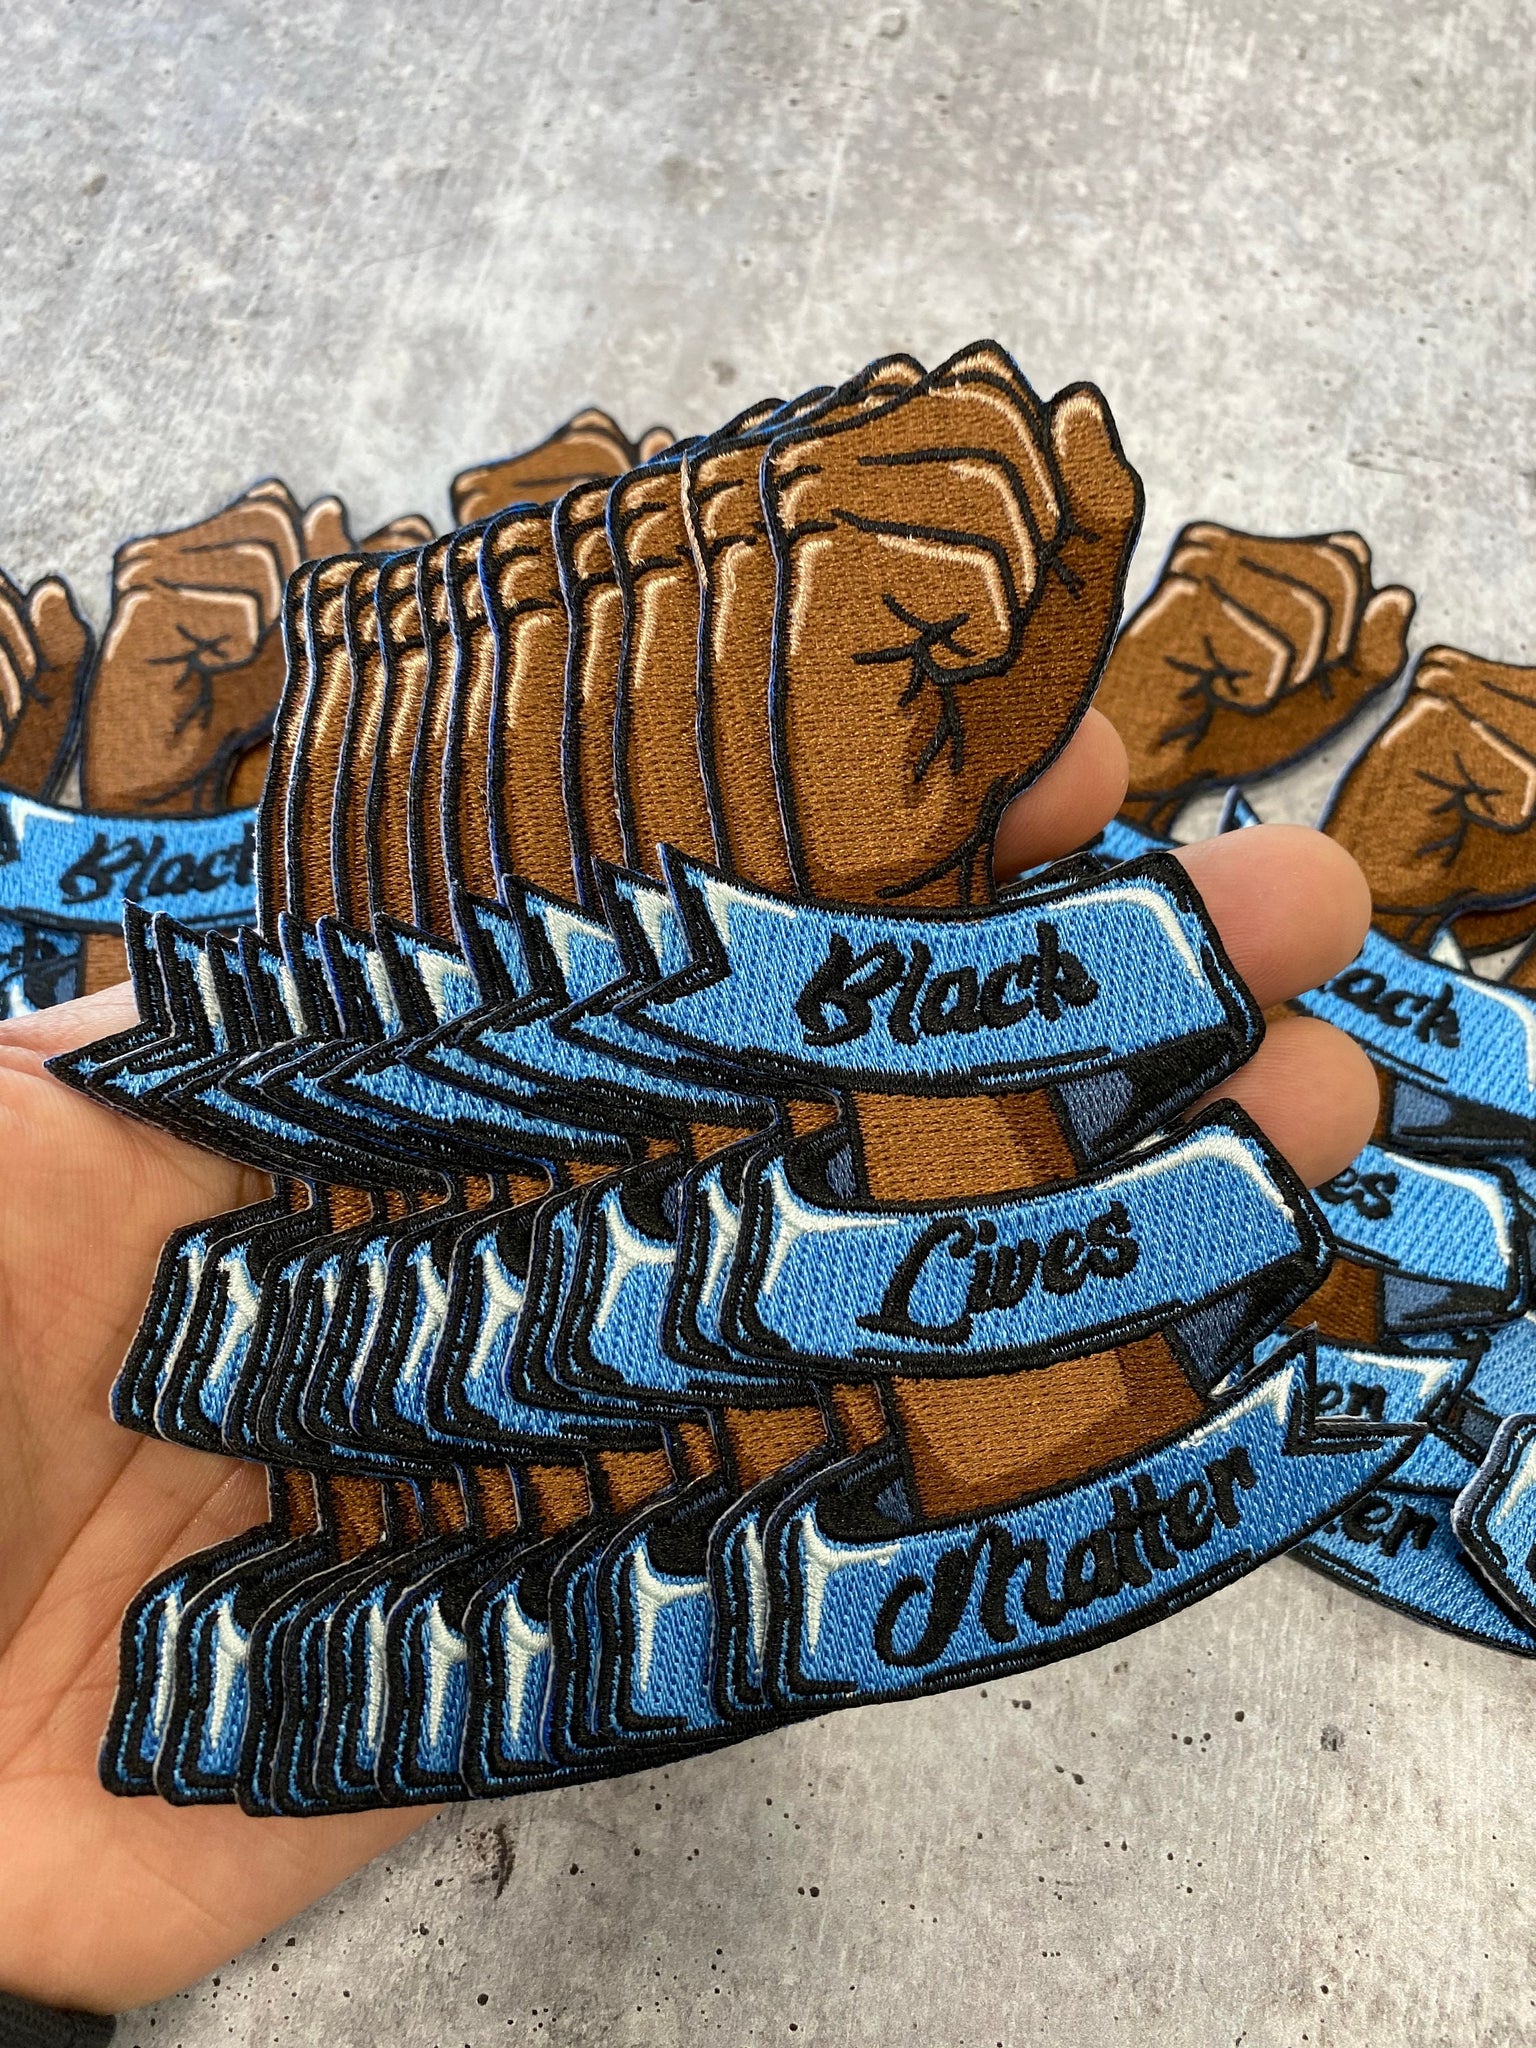 NEW, Black Lives Matter Fist (Blue Ribbon), Exclusive Afrocentric Patch, Size 4.5 x 2.5'', Iron-on Patch, Conscious Gifts, Juneteenth, BLM